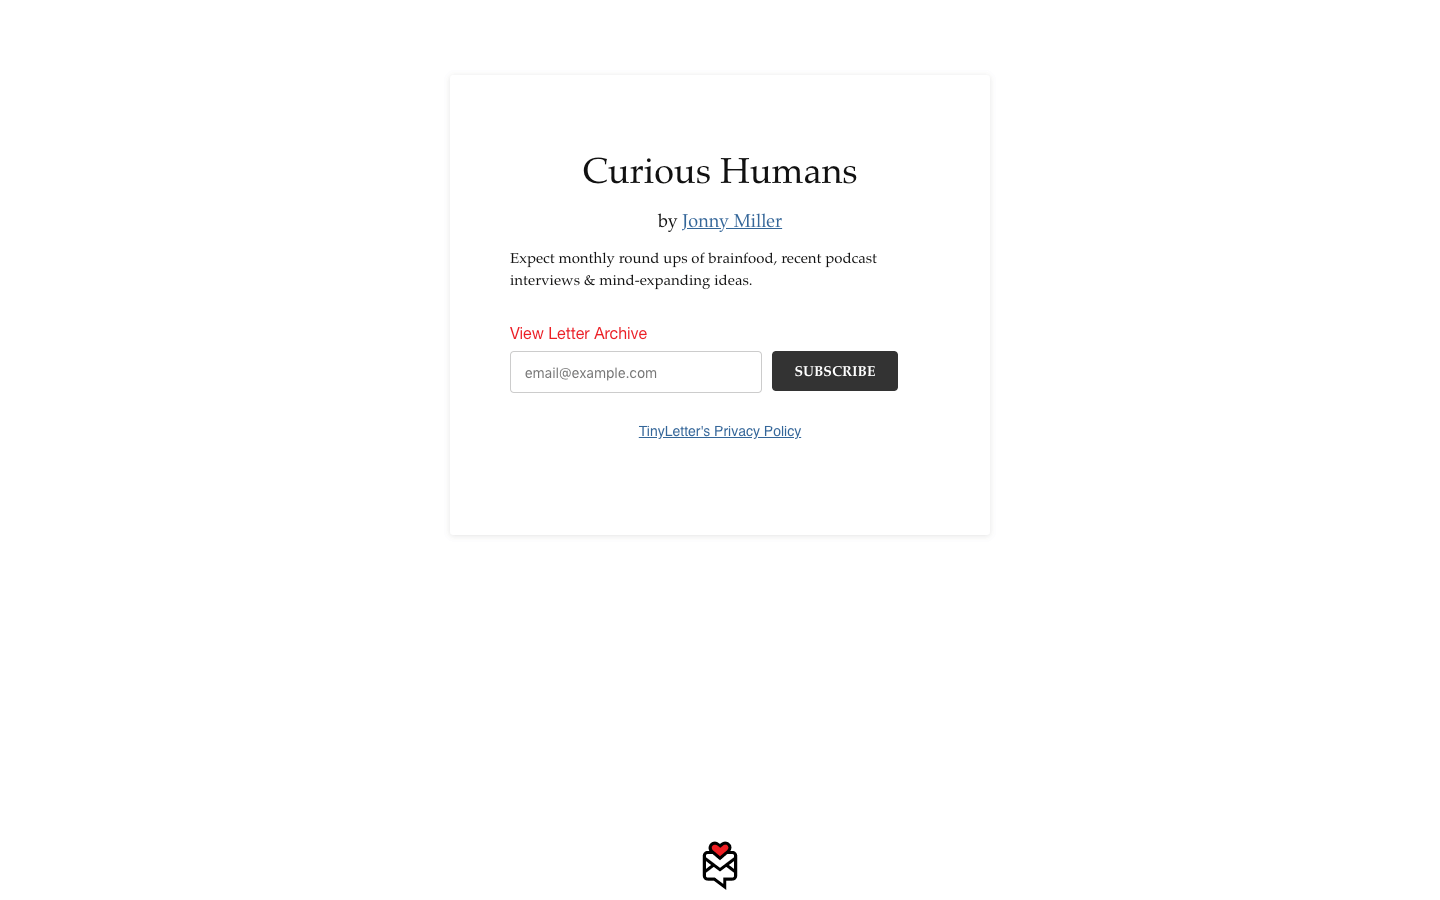 Curious Humans homepage